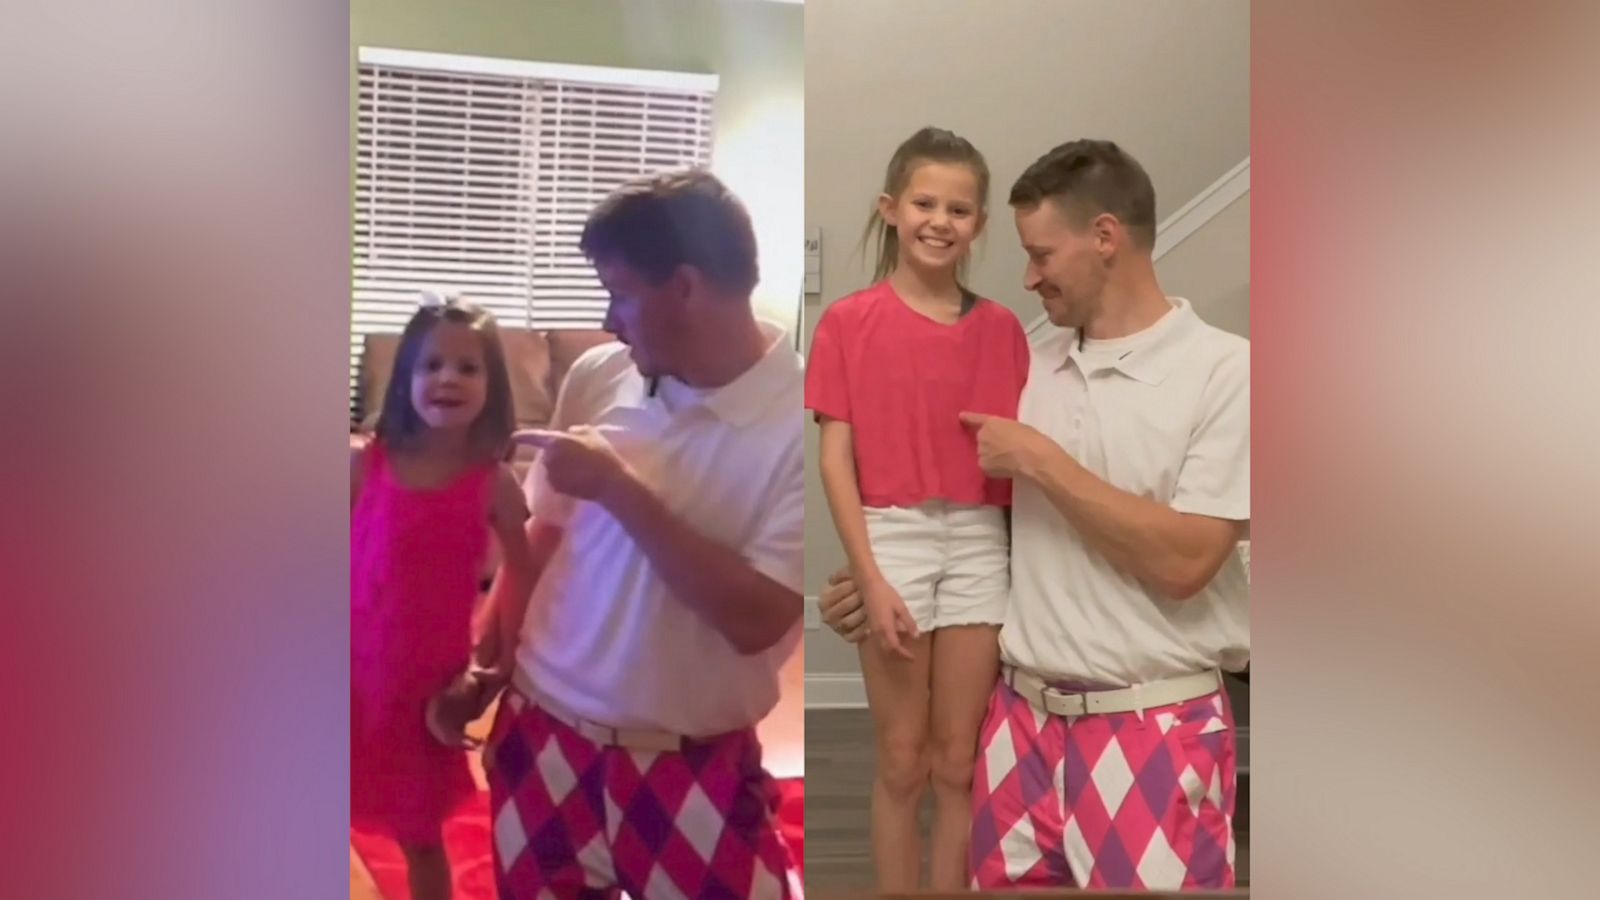 Father Daughter Dancing Duo Who Went Viral In 2016 Recreate Their 